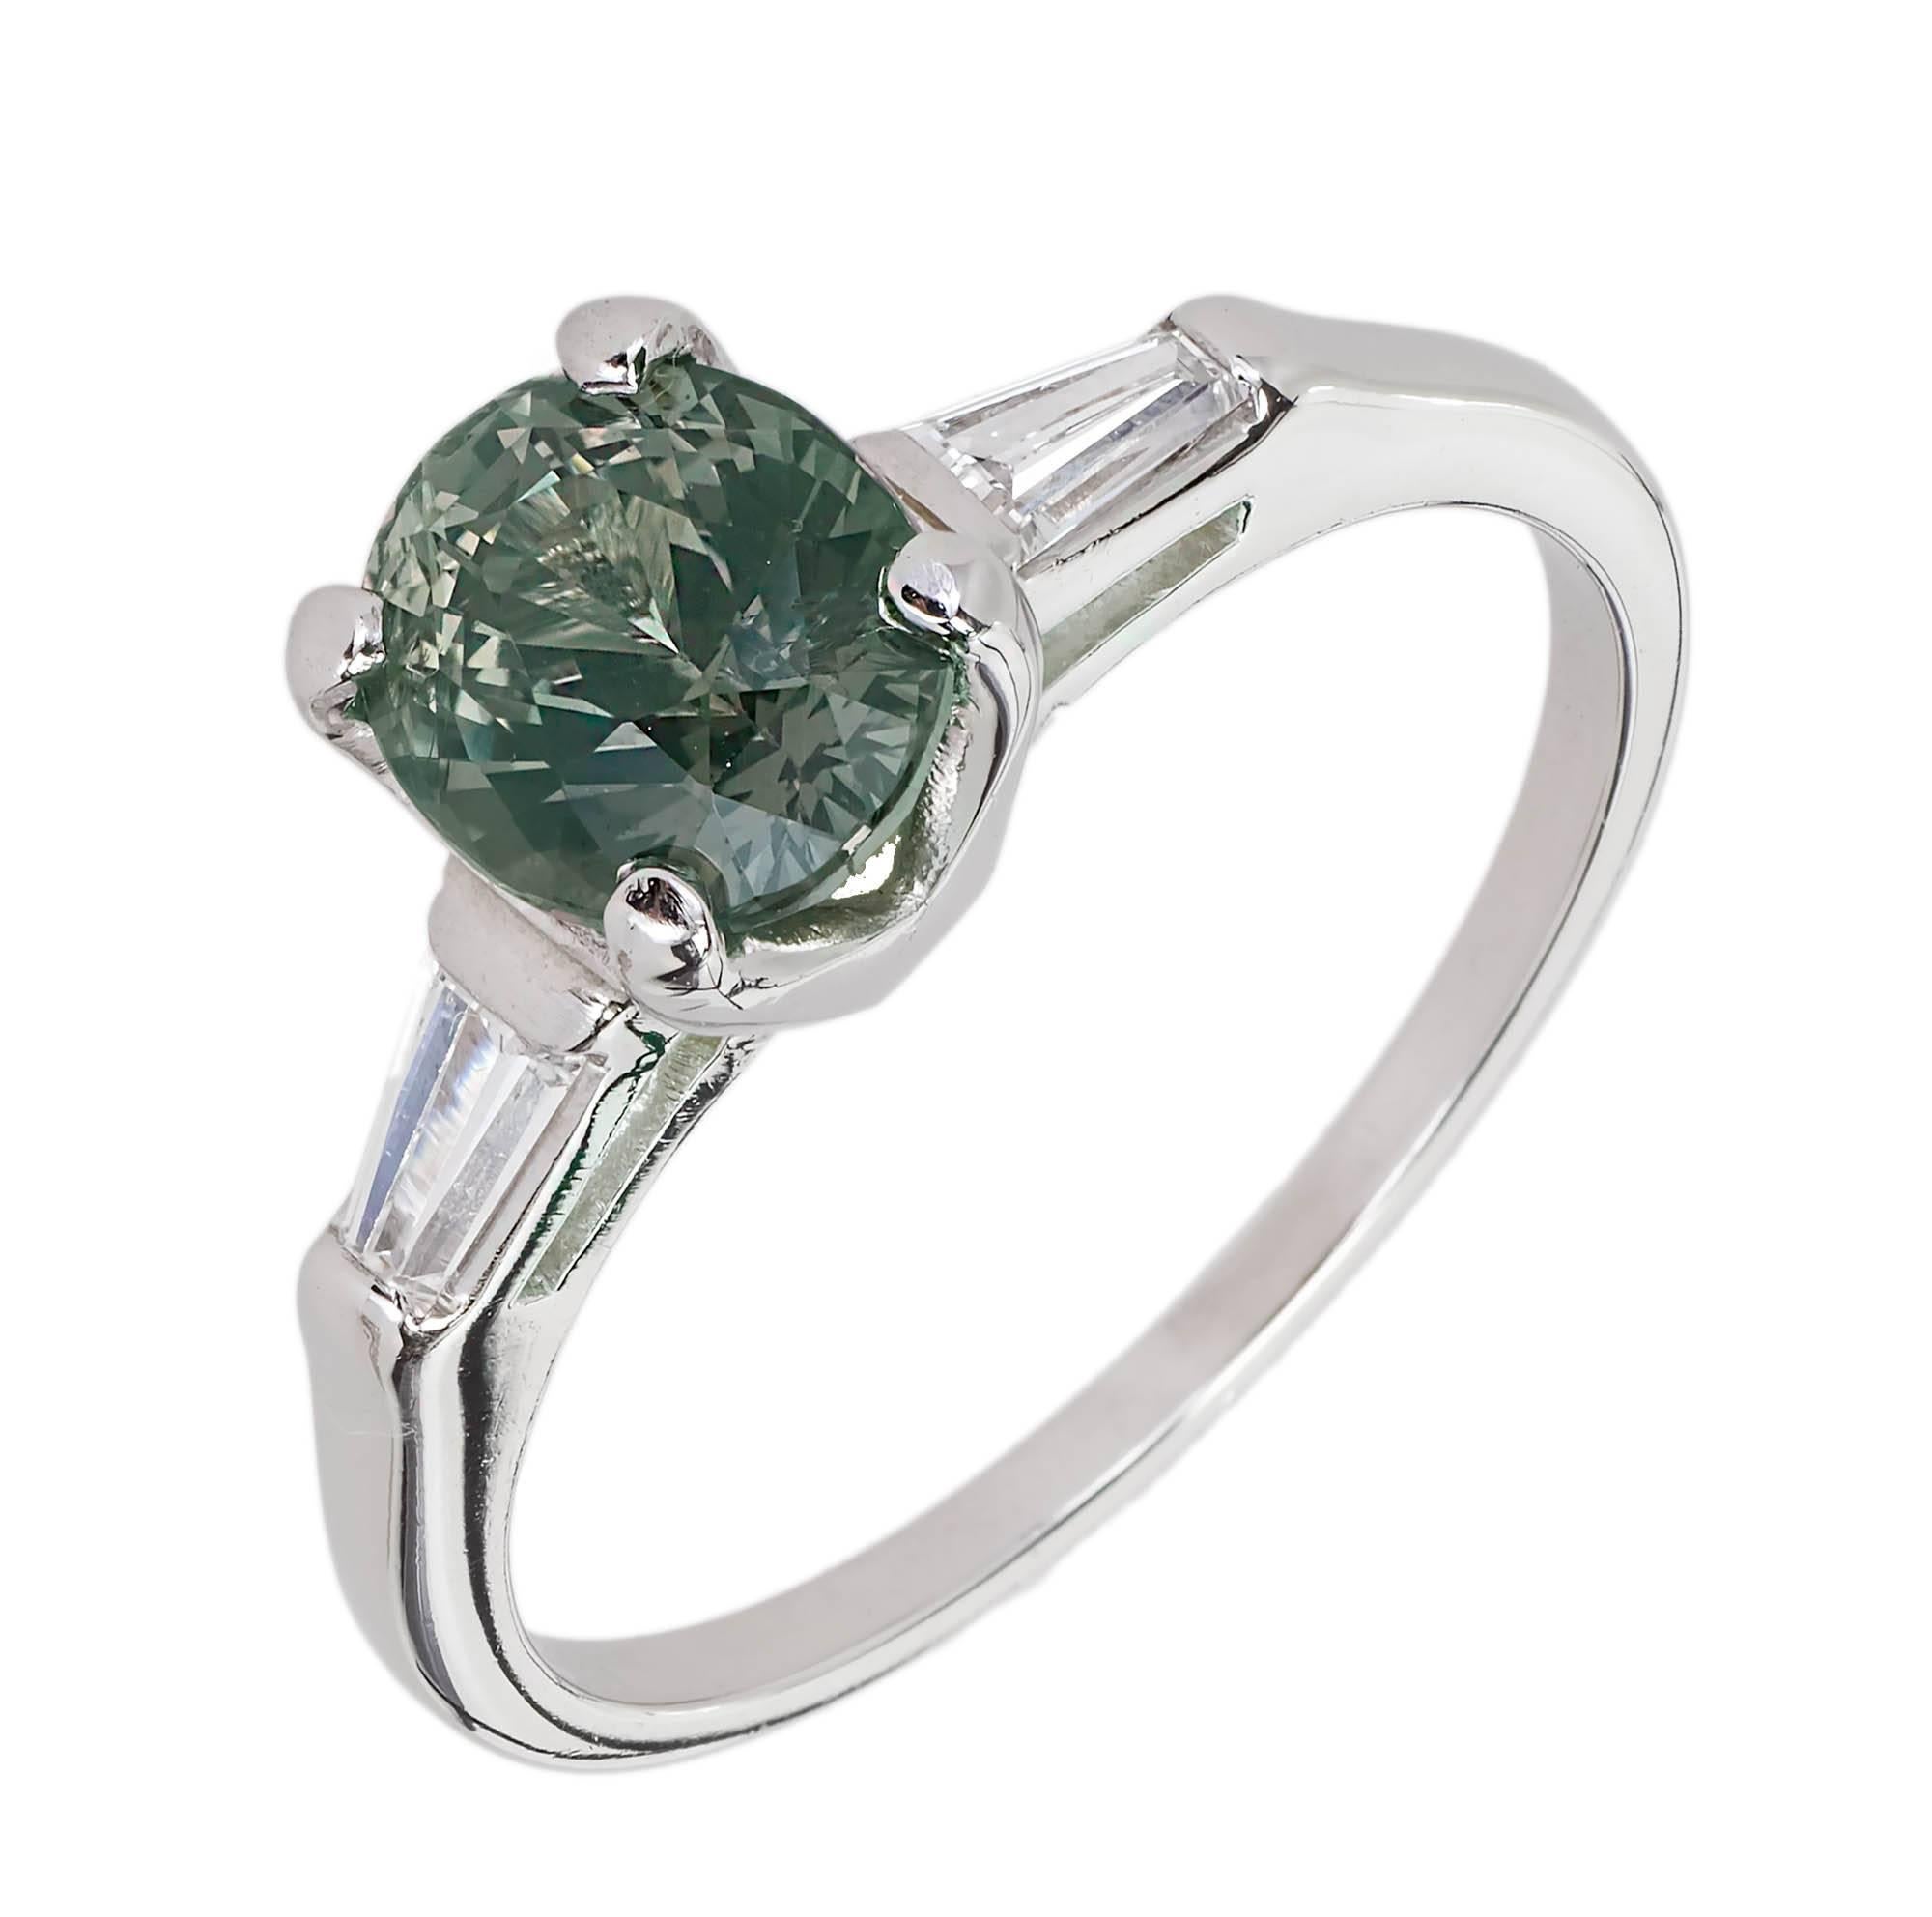 Vintage Alexandrite Platinum engagement ring circa 1950 in a classic setting with tapered baguette Diamond accents. GIA certified Alexandrite center that changes color from green to grayish purple in different lights.

1 oval genuine green to